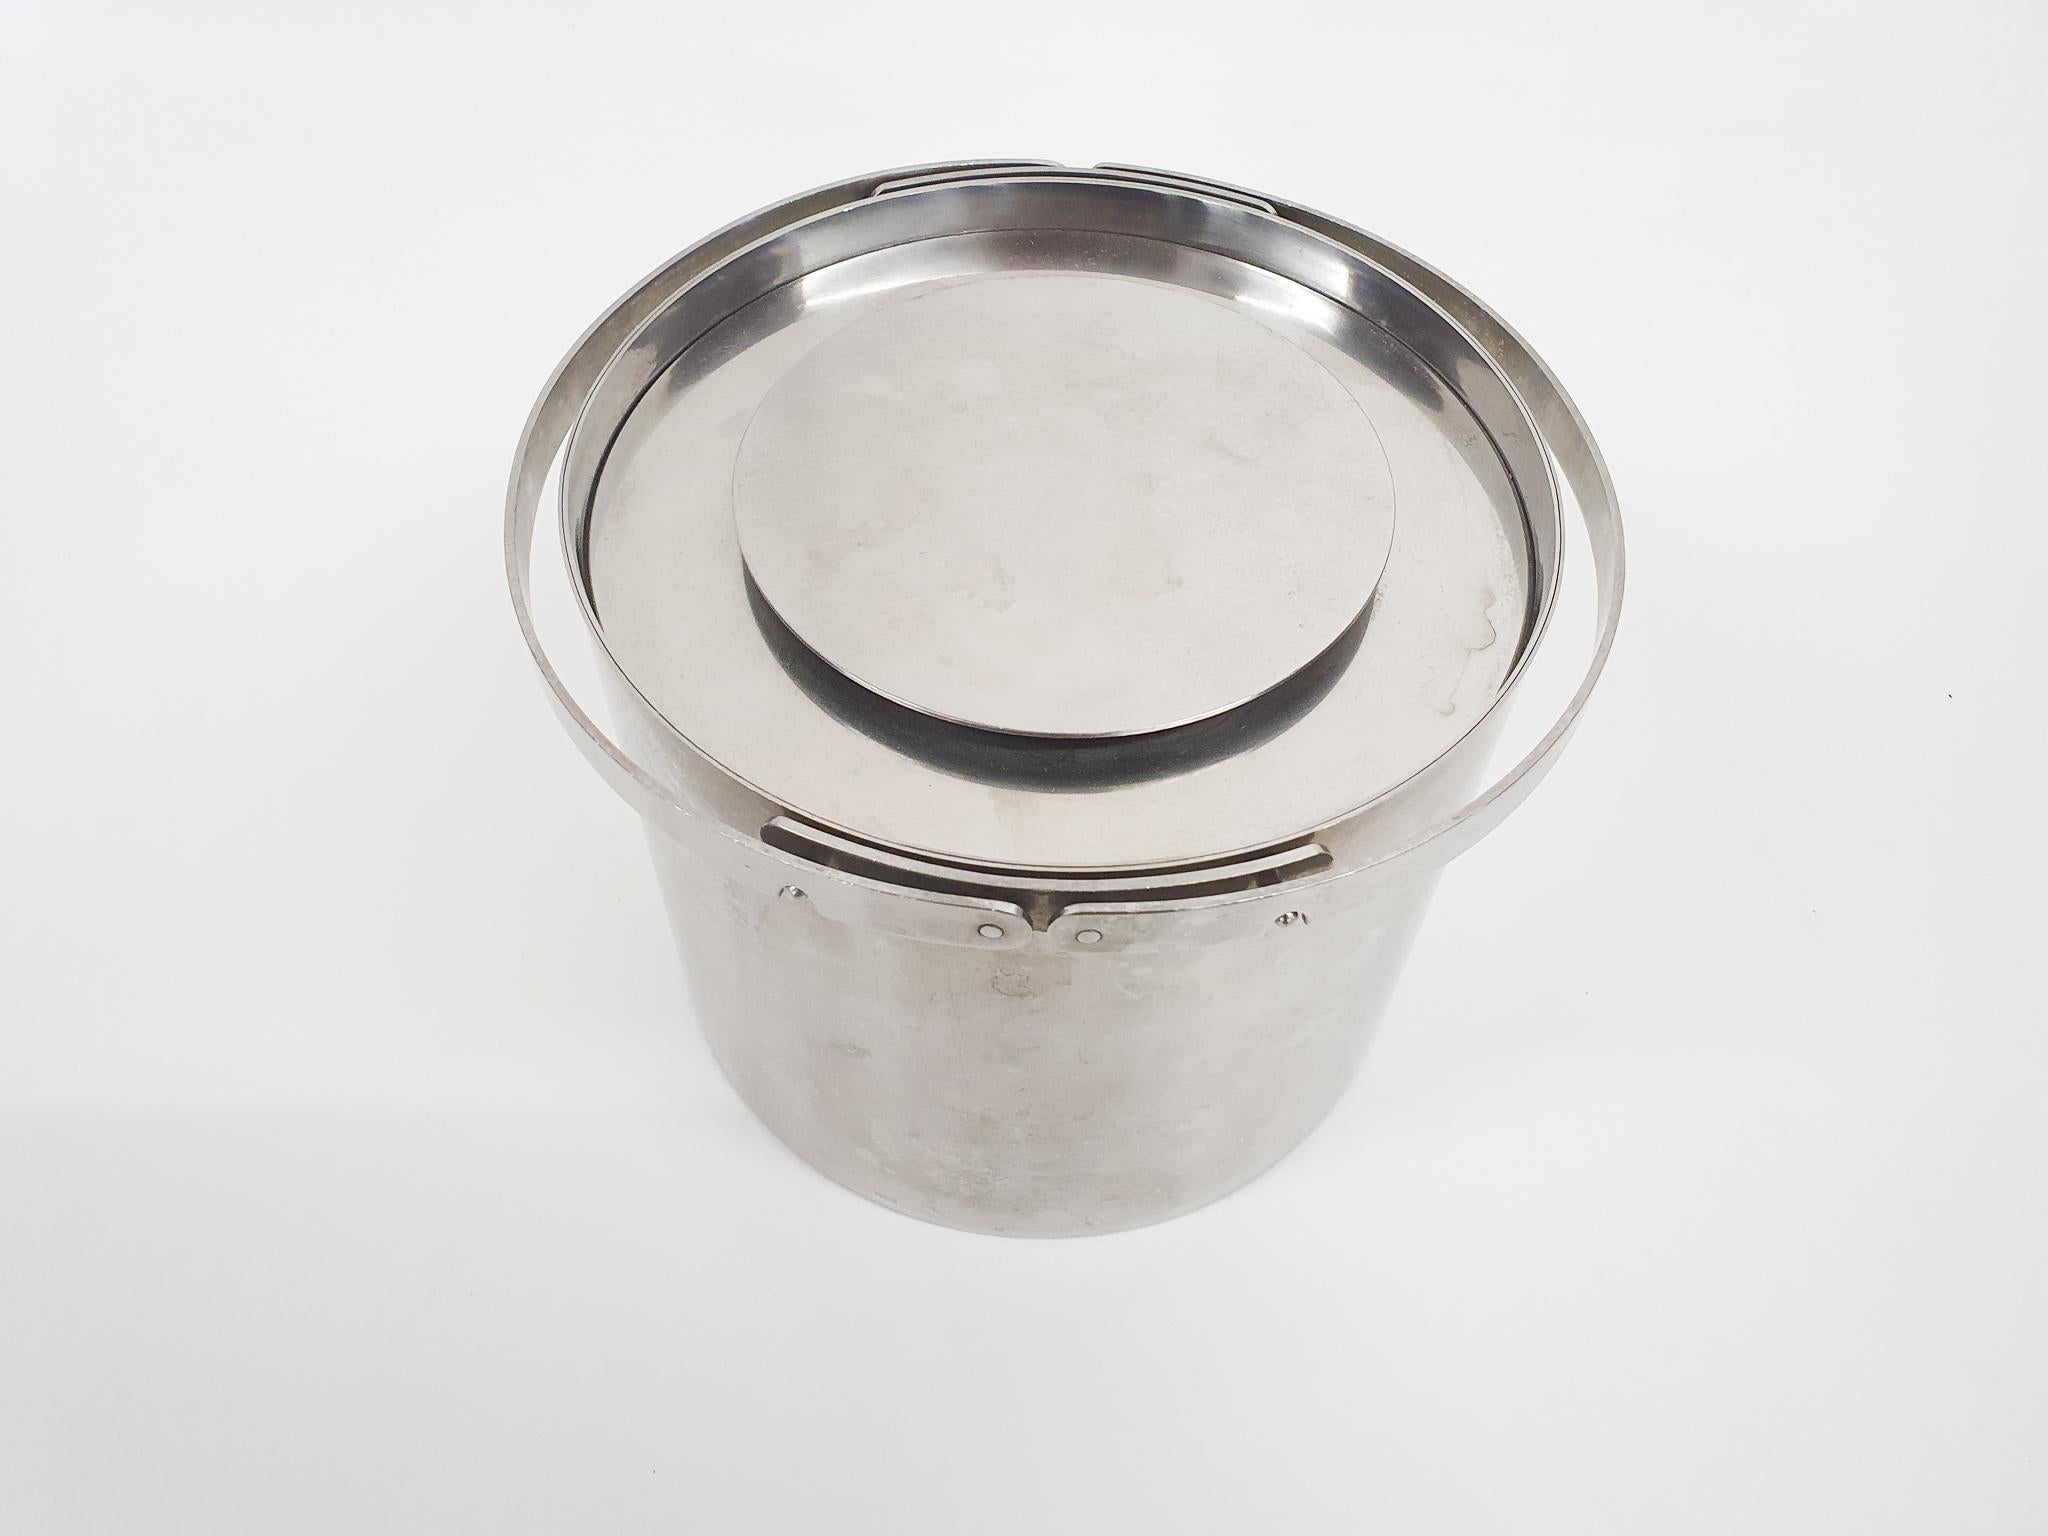 Mid-20th Century Stainless Steel Ice Bucket by Arne Jacobsen for Stelton, Denmark, 1960's For Sale